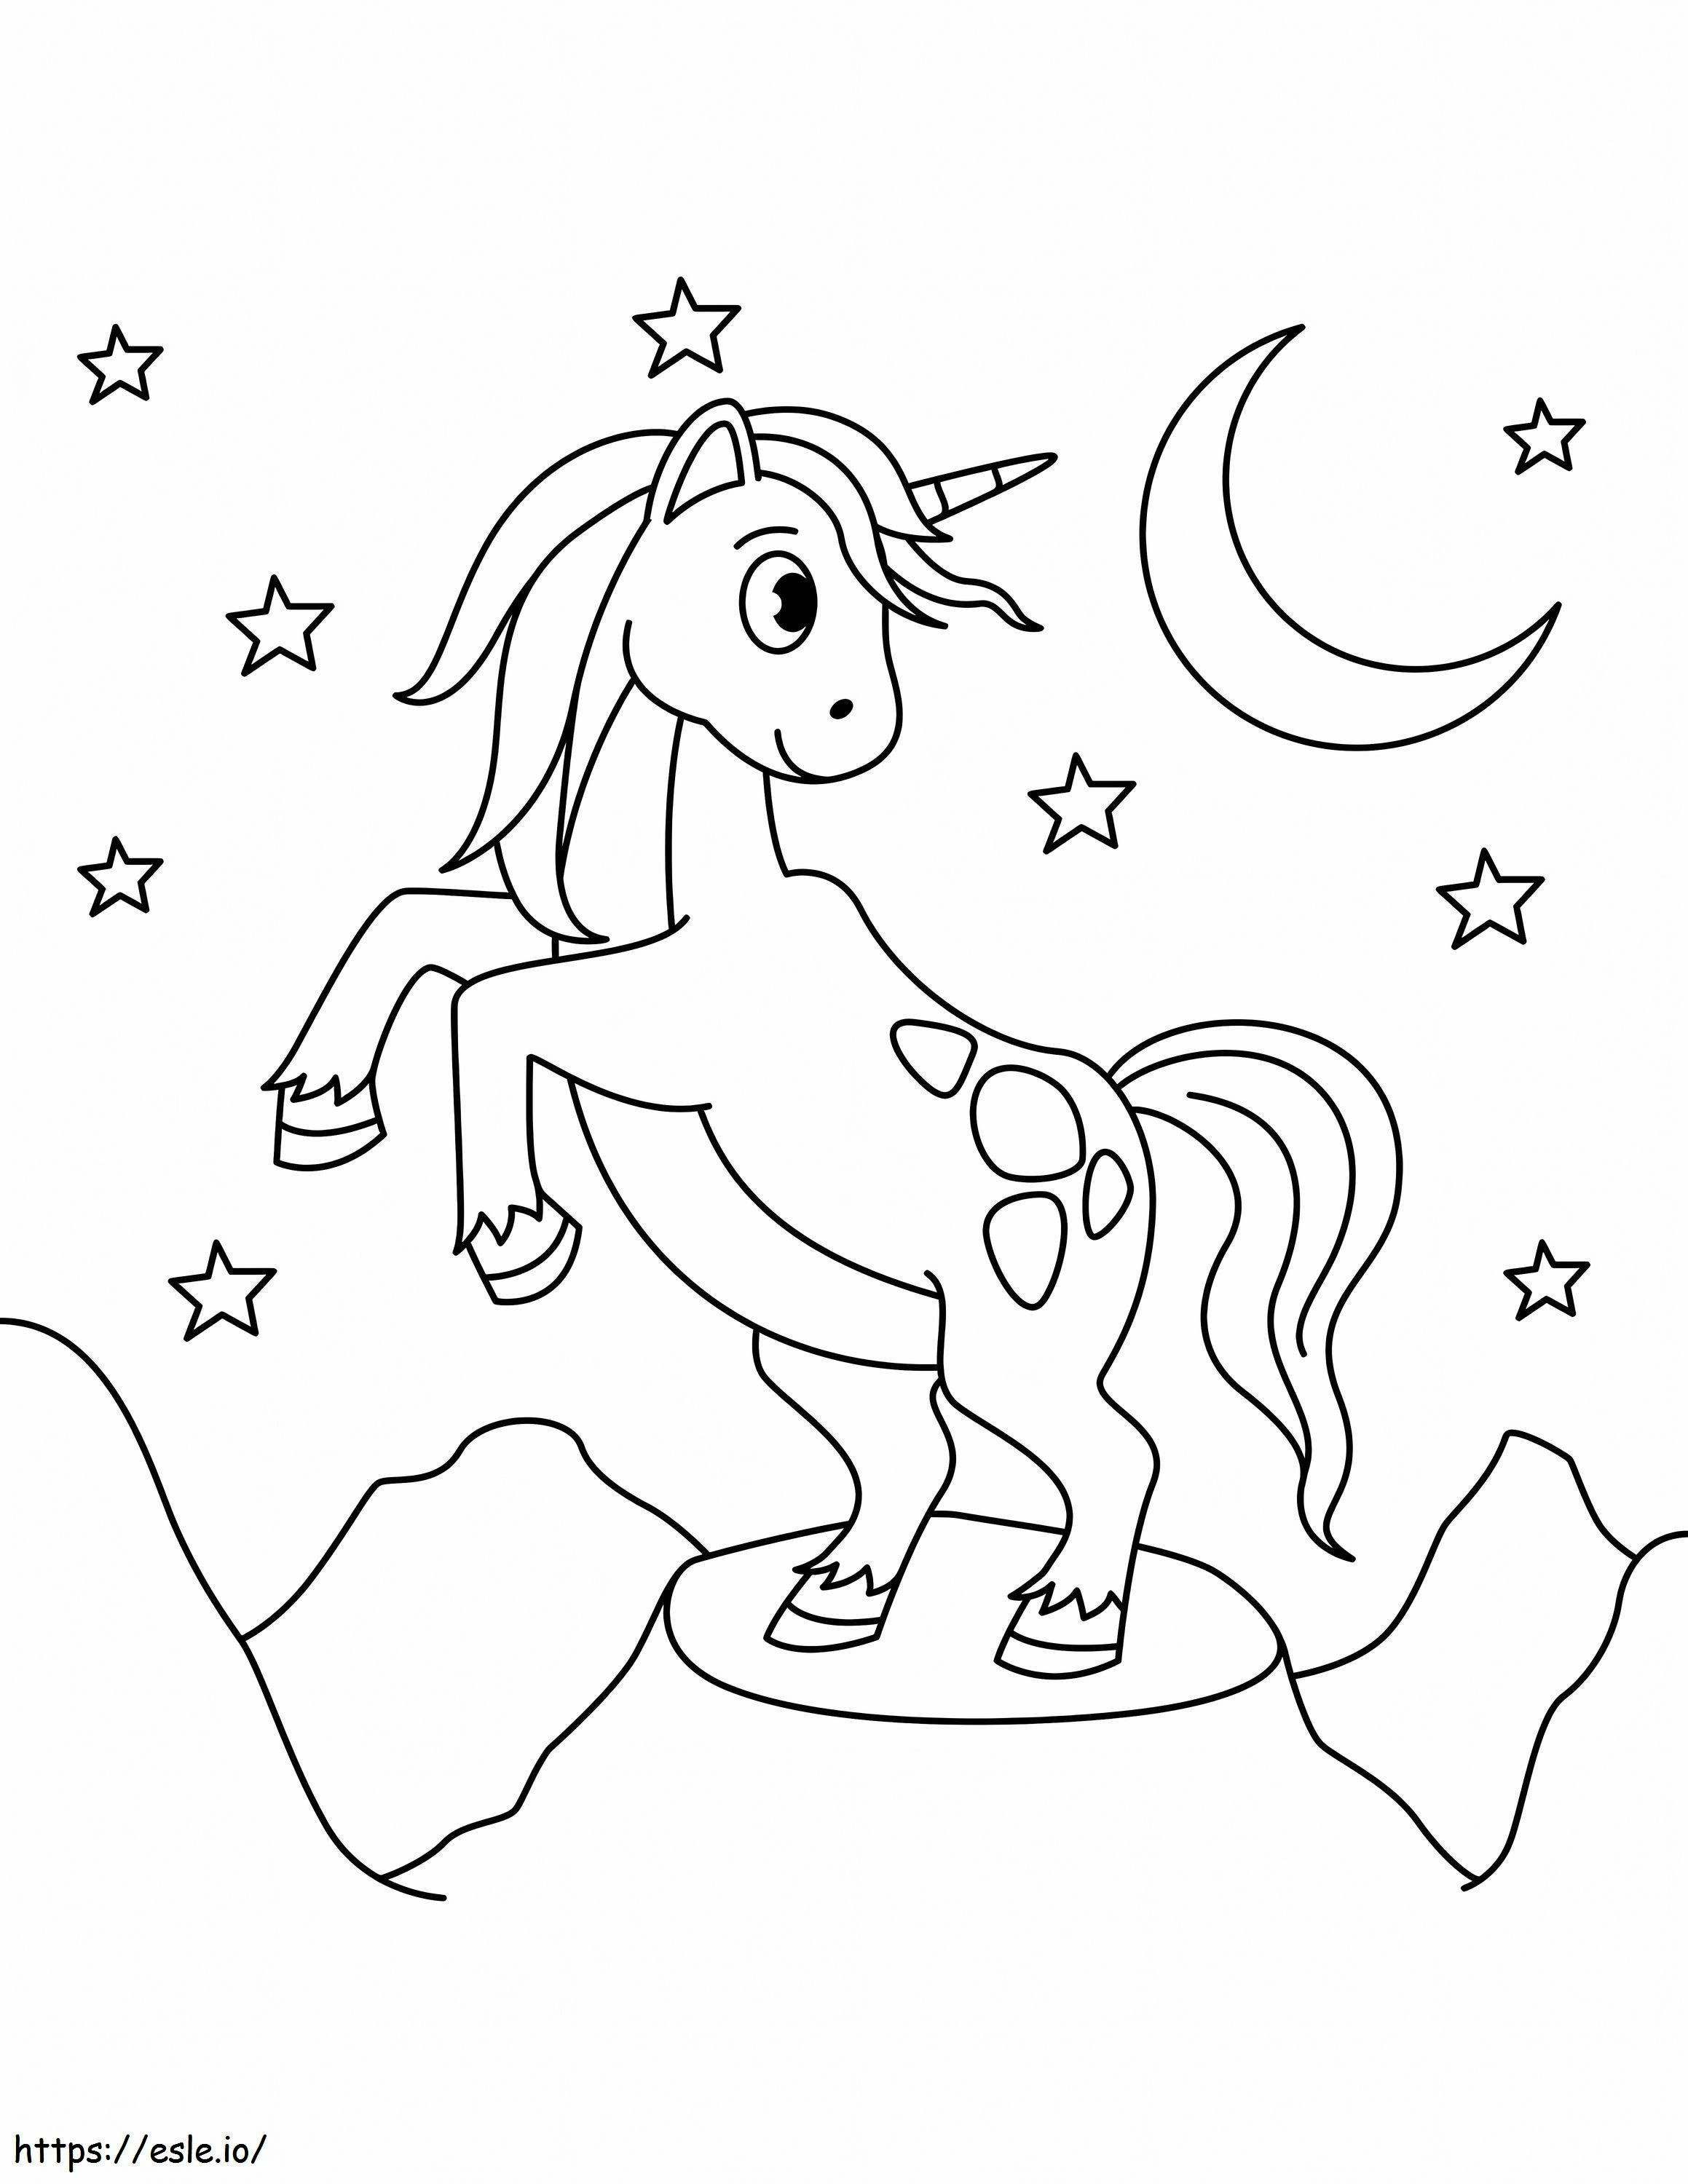 1576117788 Midnight Unicorn coloring page